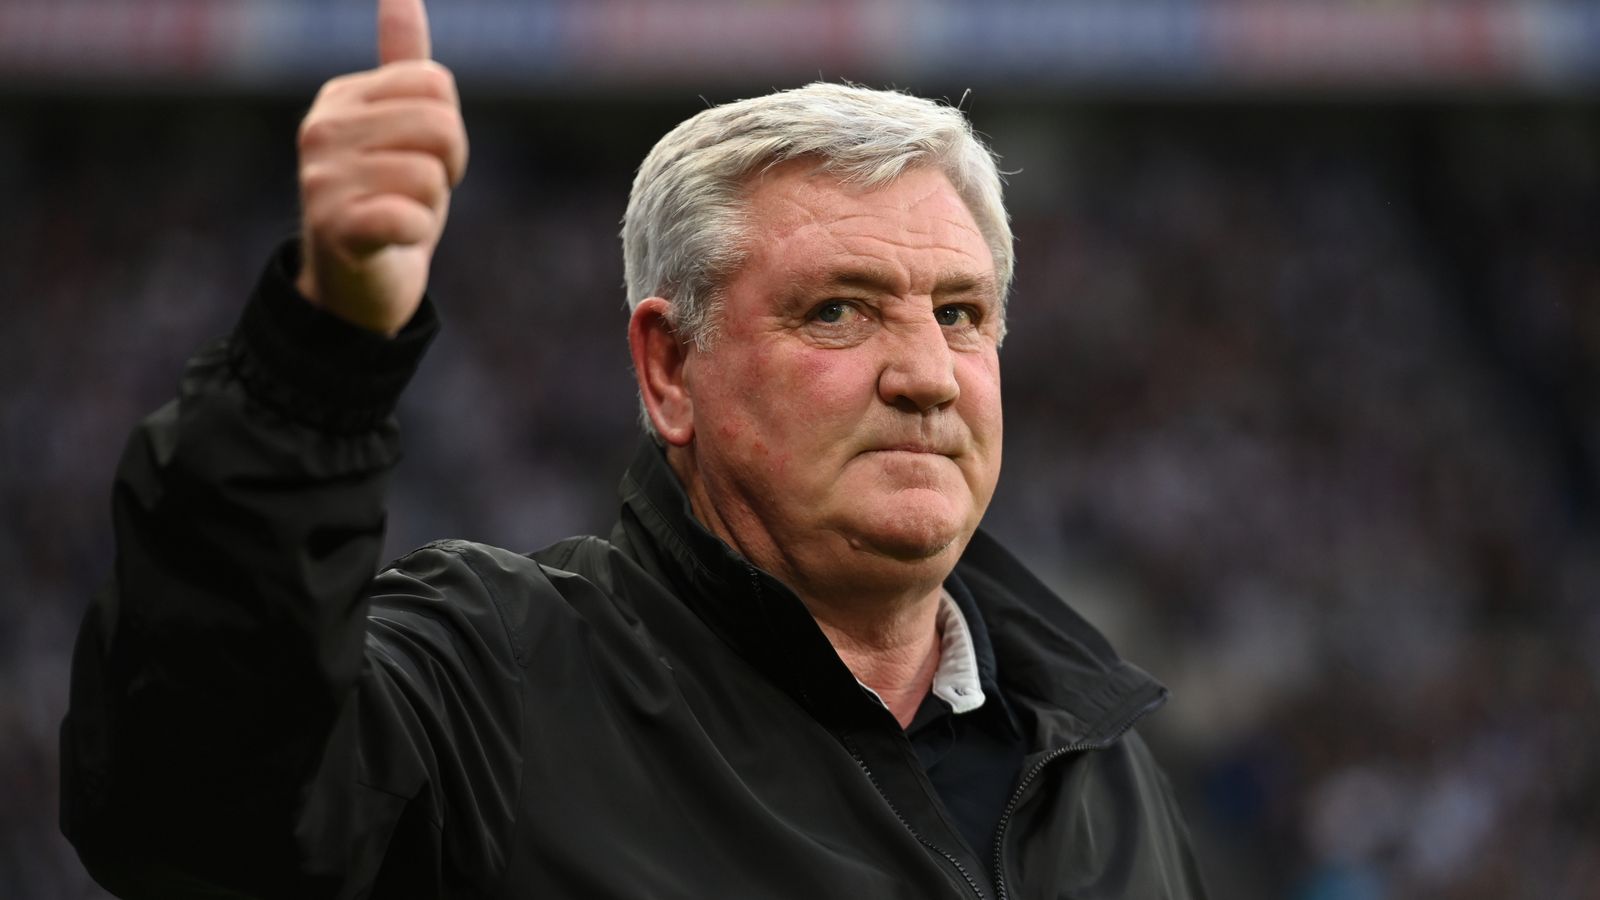 Newcastle owners' treatment of Steve Bruce 'totally wrong', says Gary Neville